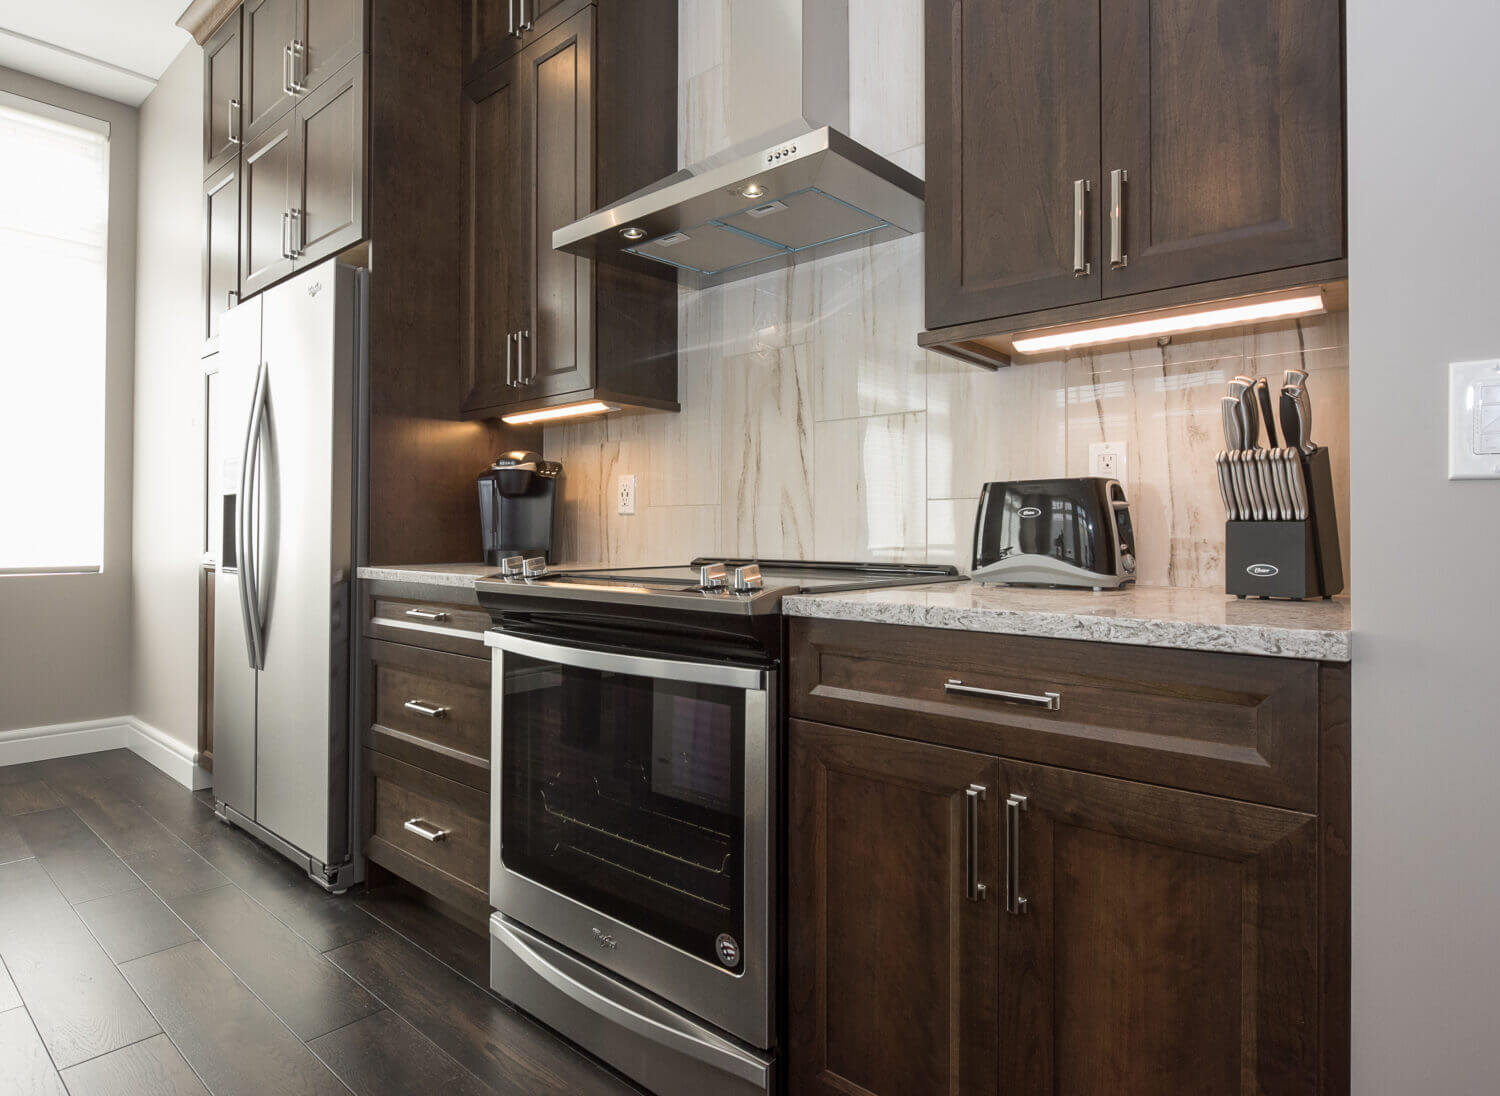 Urban Kitchen with Cherry Cabinets - Dura Supreme Cabinetry